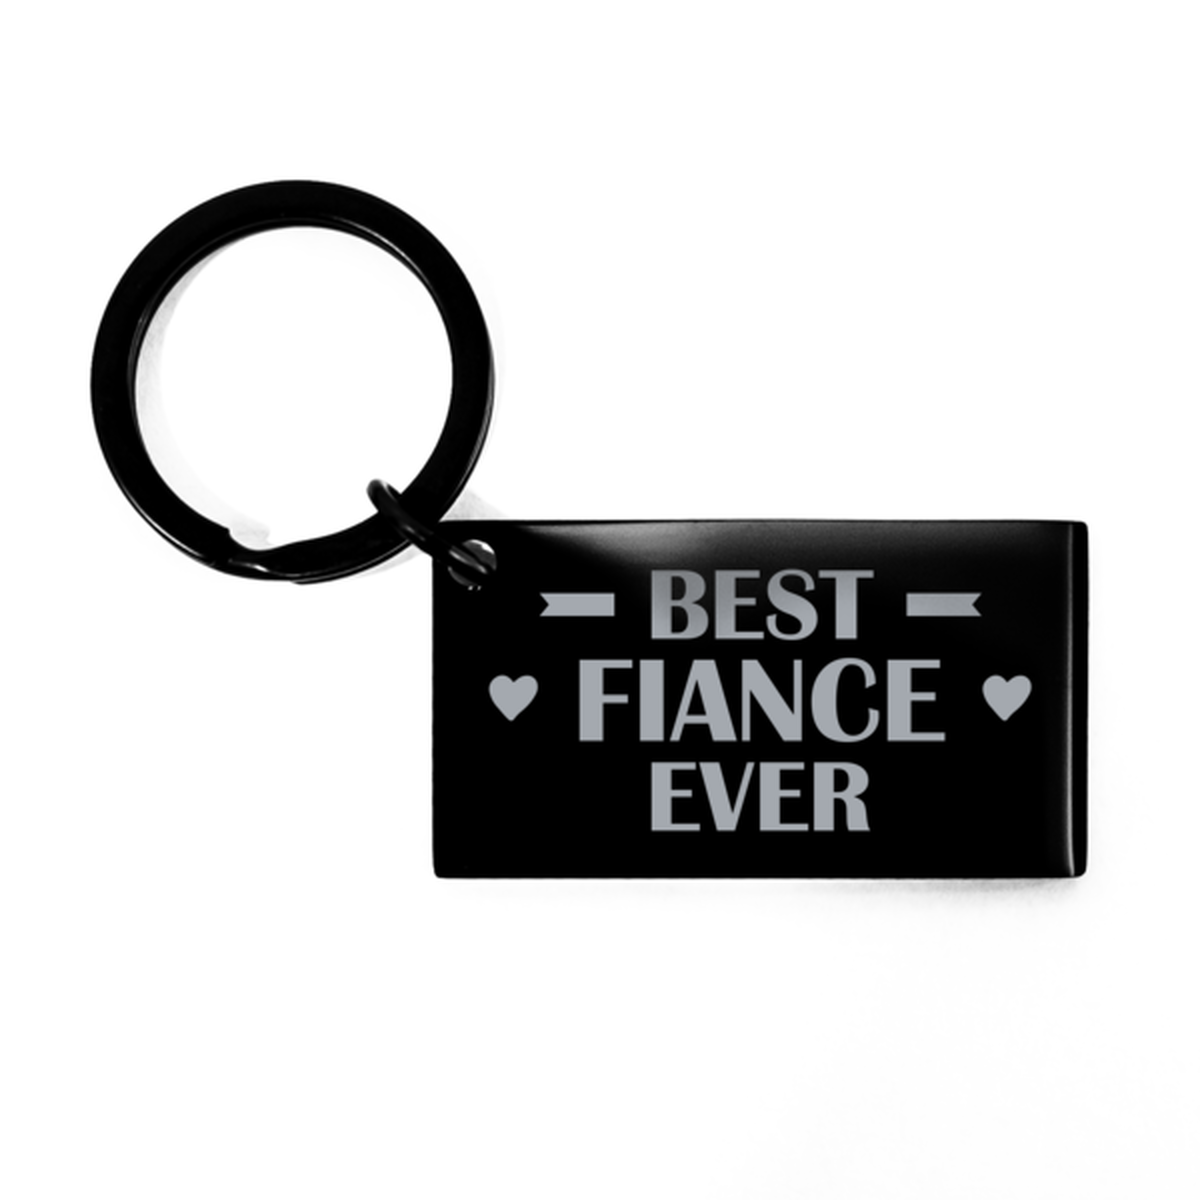 Best Fiance Ever Fiance Gifts, Funny Black Keychain For Fiance, Birthday Engraved Keyring Presents For Men